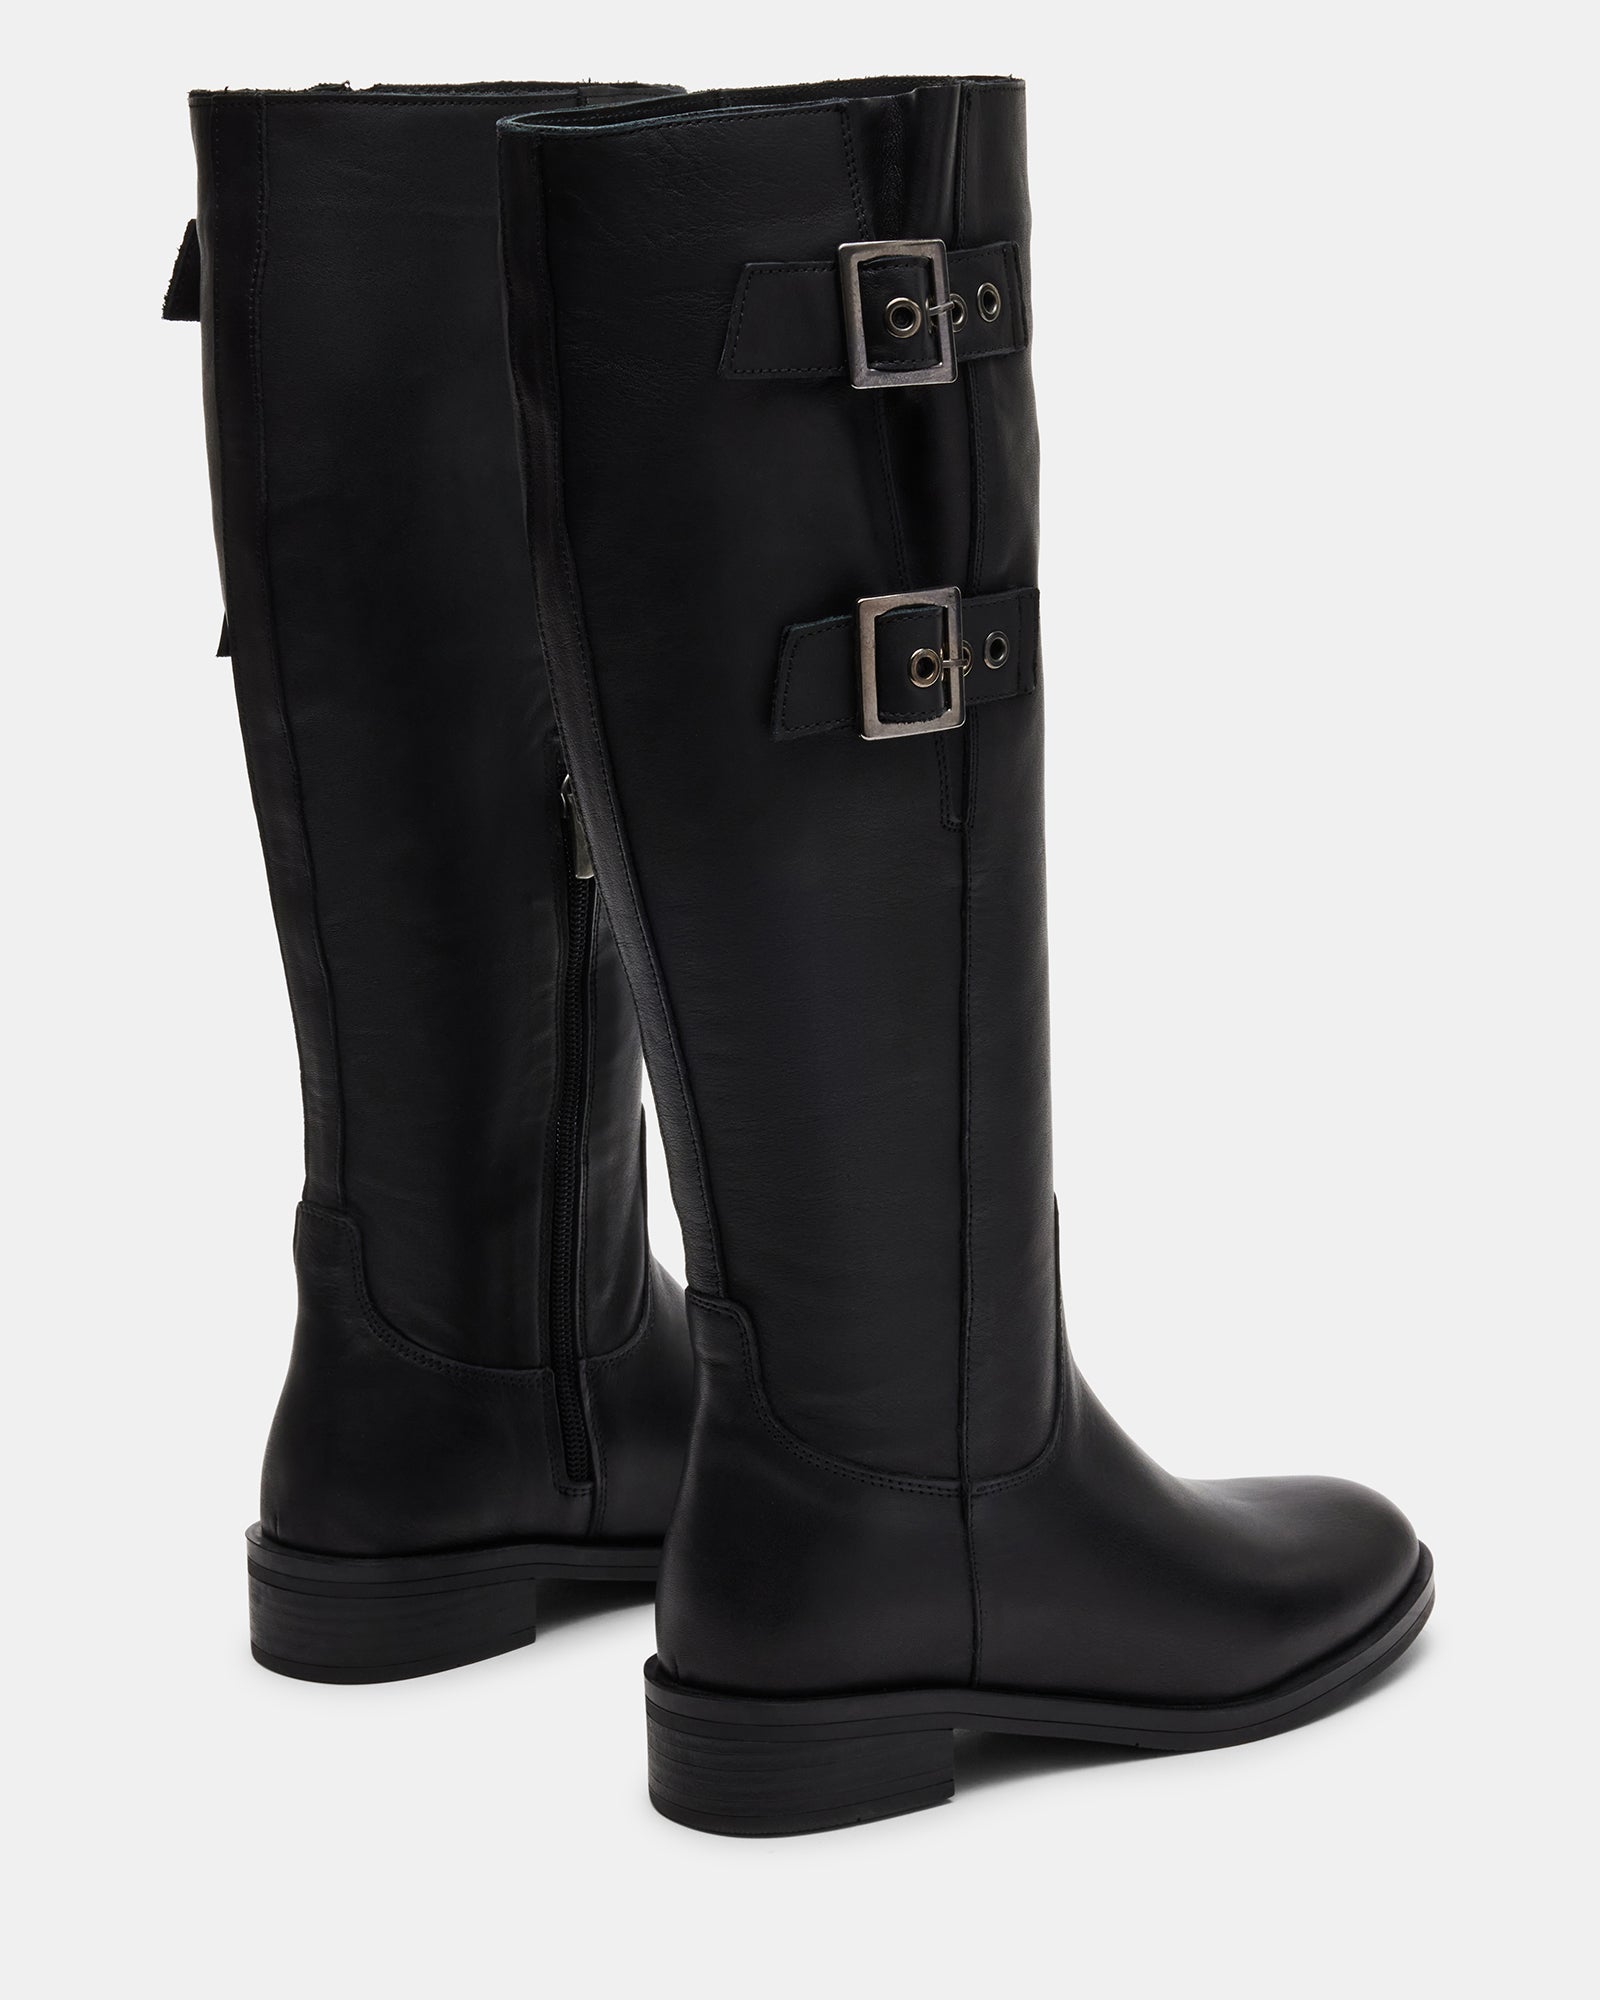 JAYMES Black Leather Knee High Boot| Women's Boots – Steve Madden